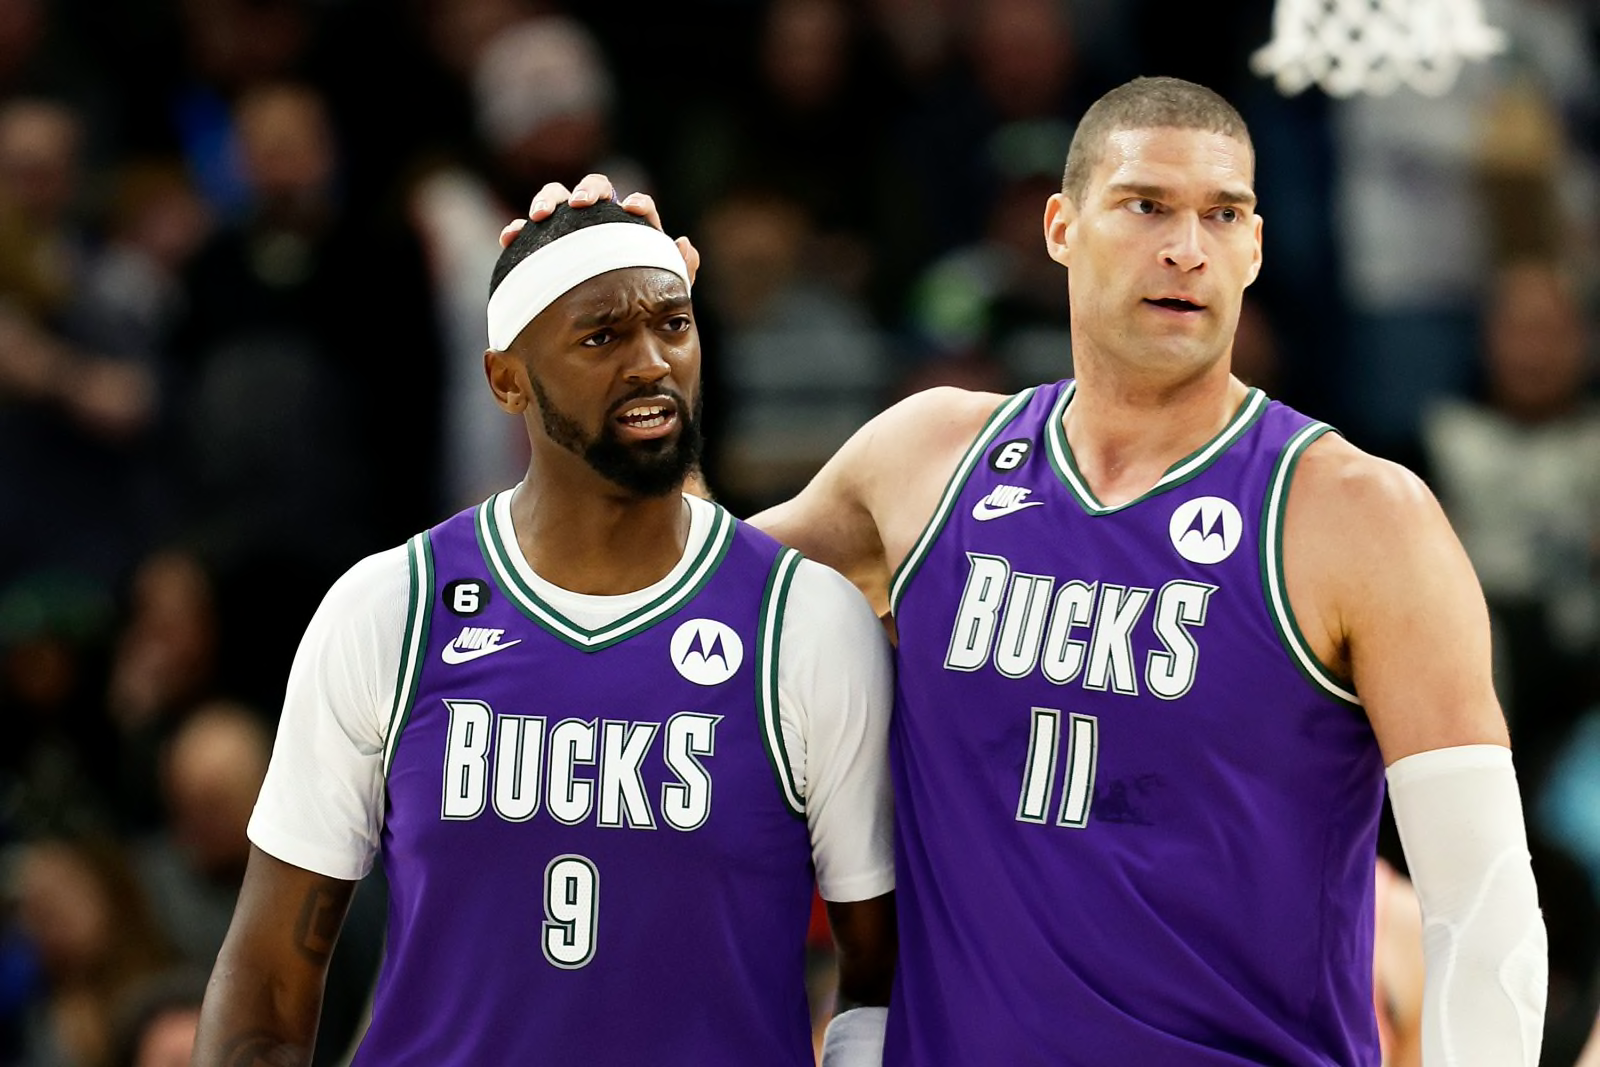 At long last, the Bucks are bringing back the purple uniforms